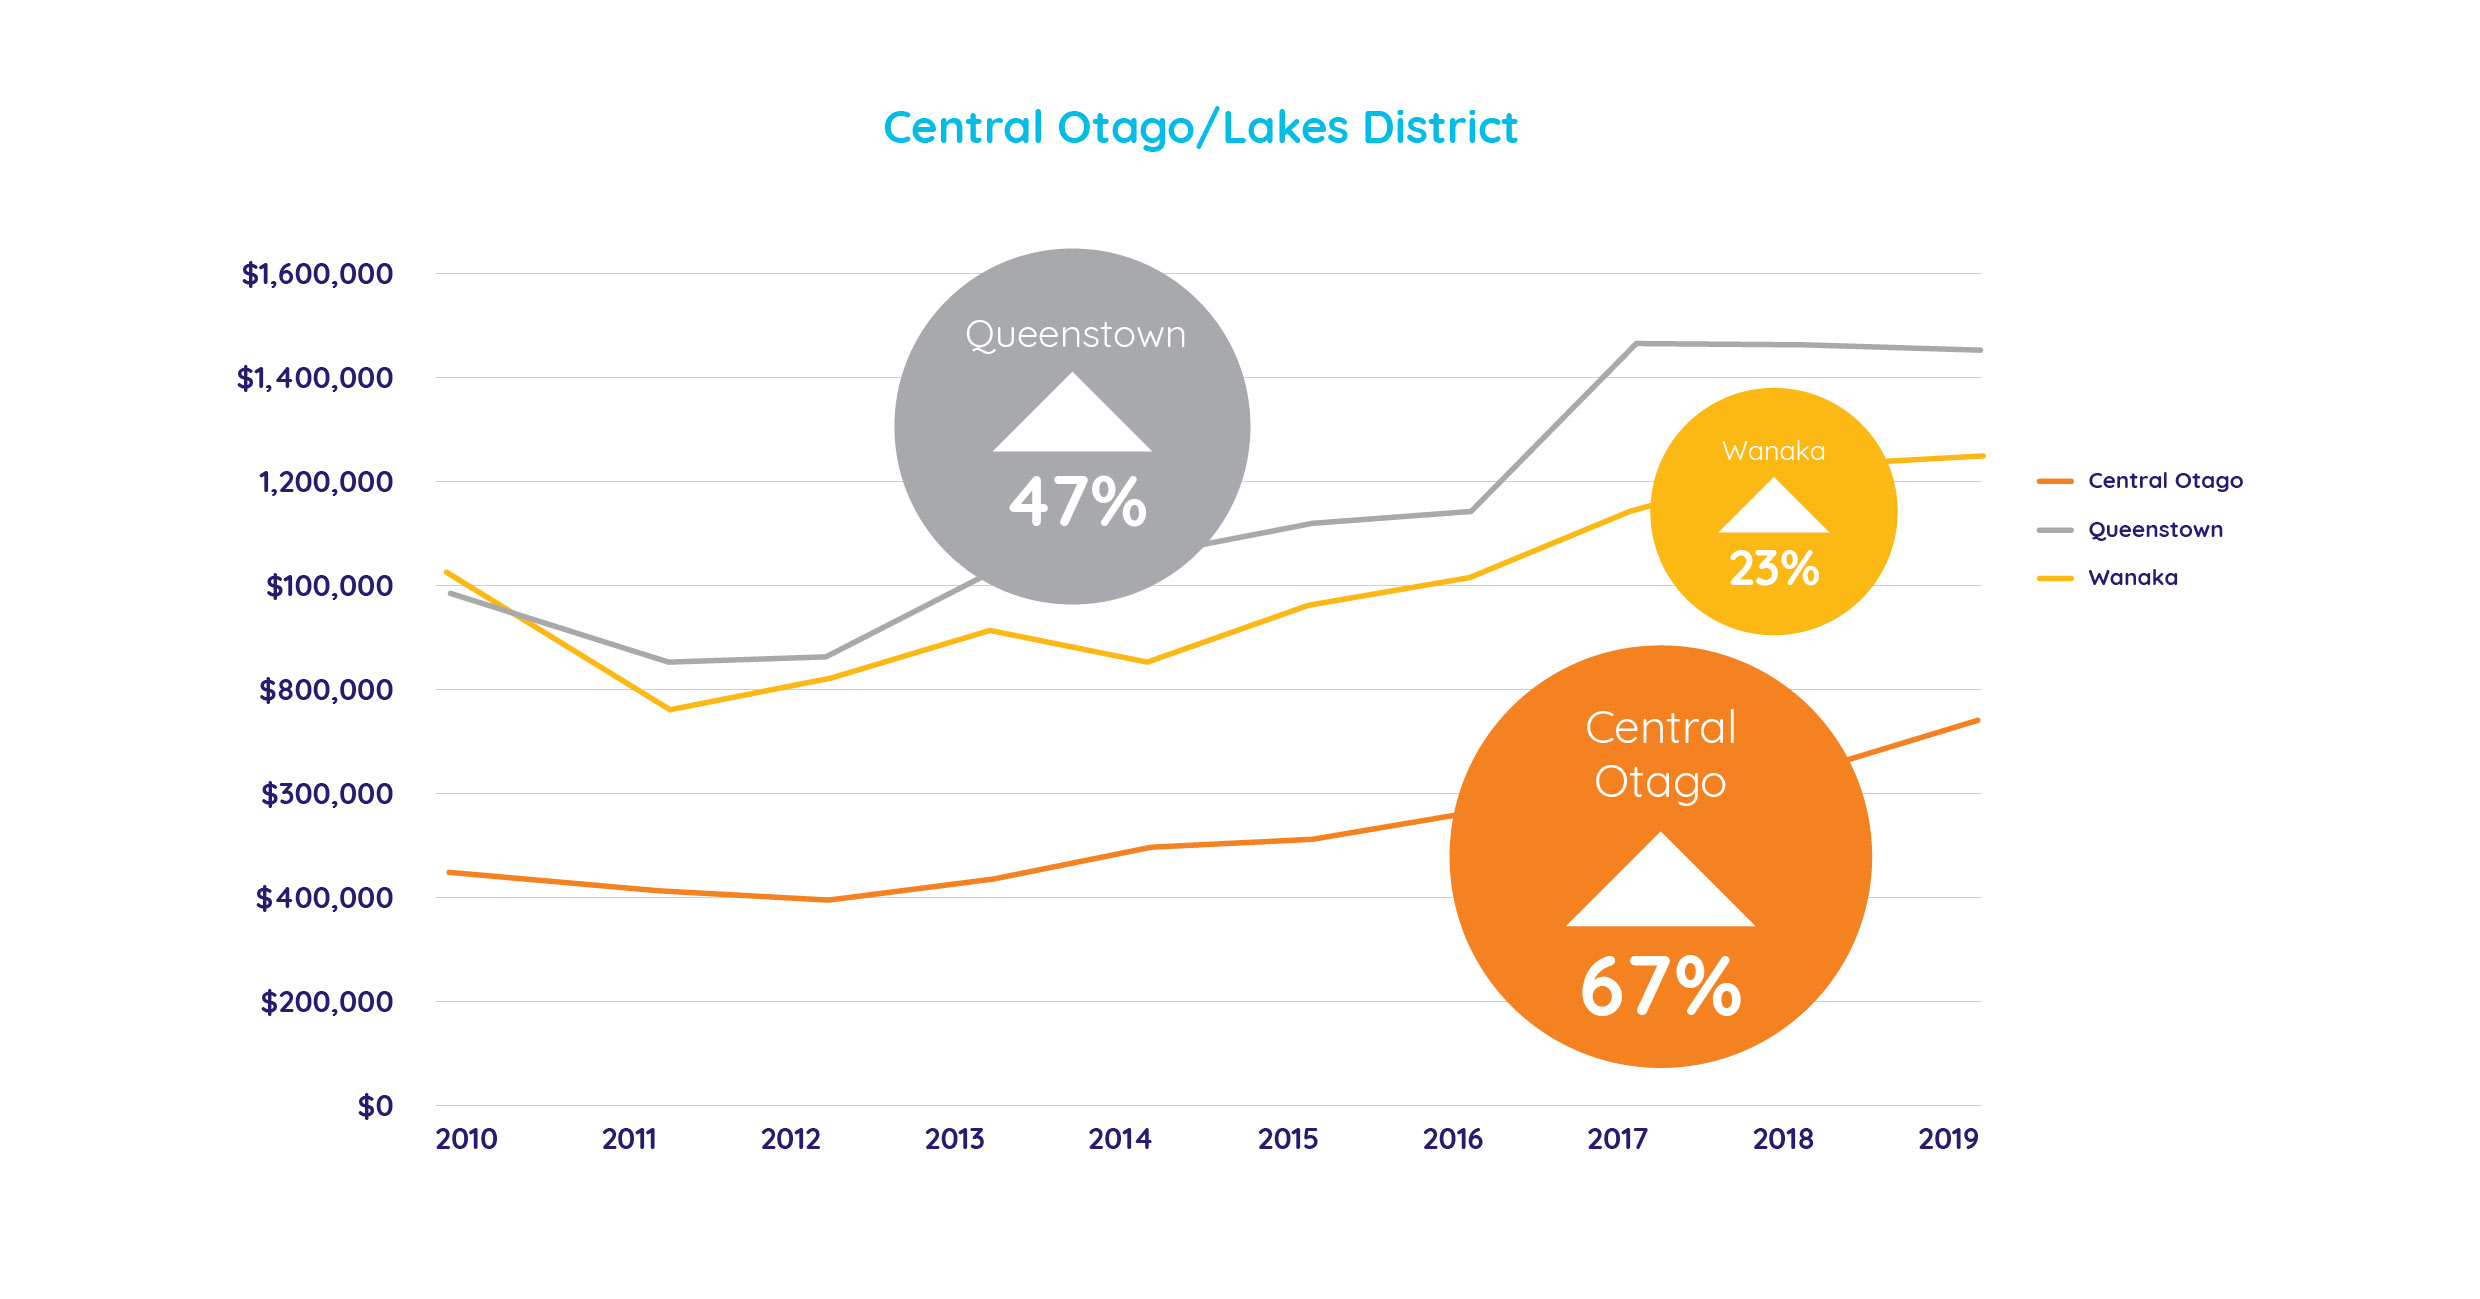 Average asking prices in Central Otago/Lakes District over the last 10 years